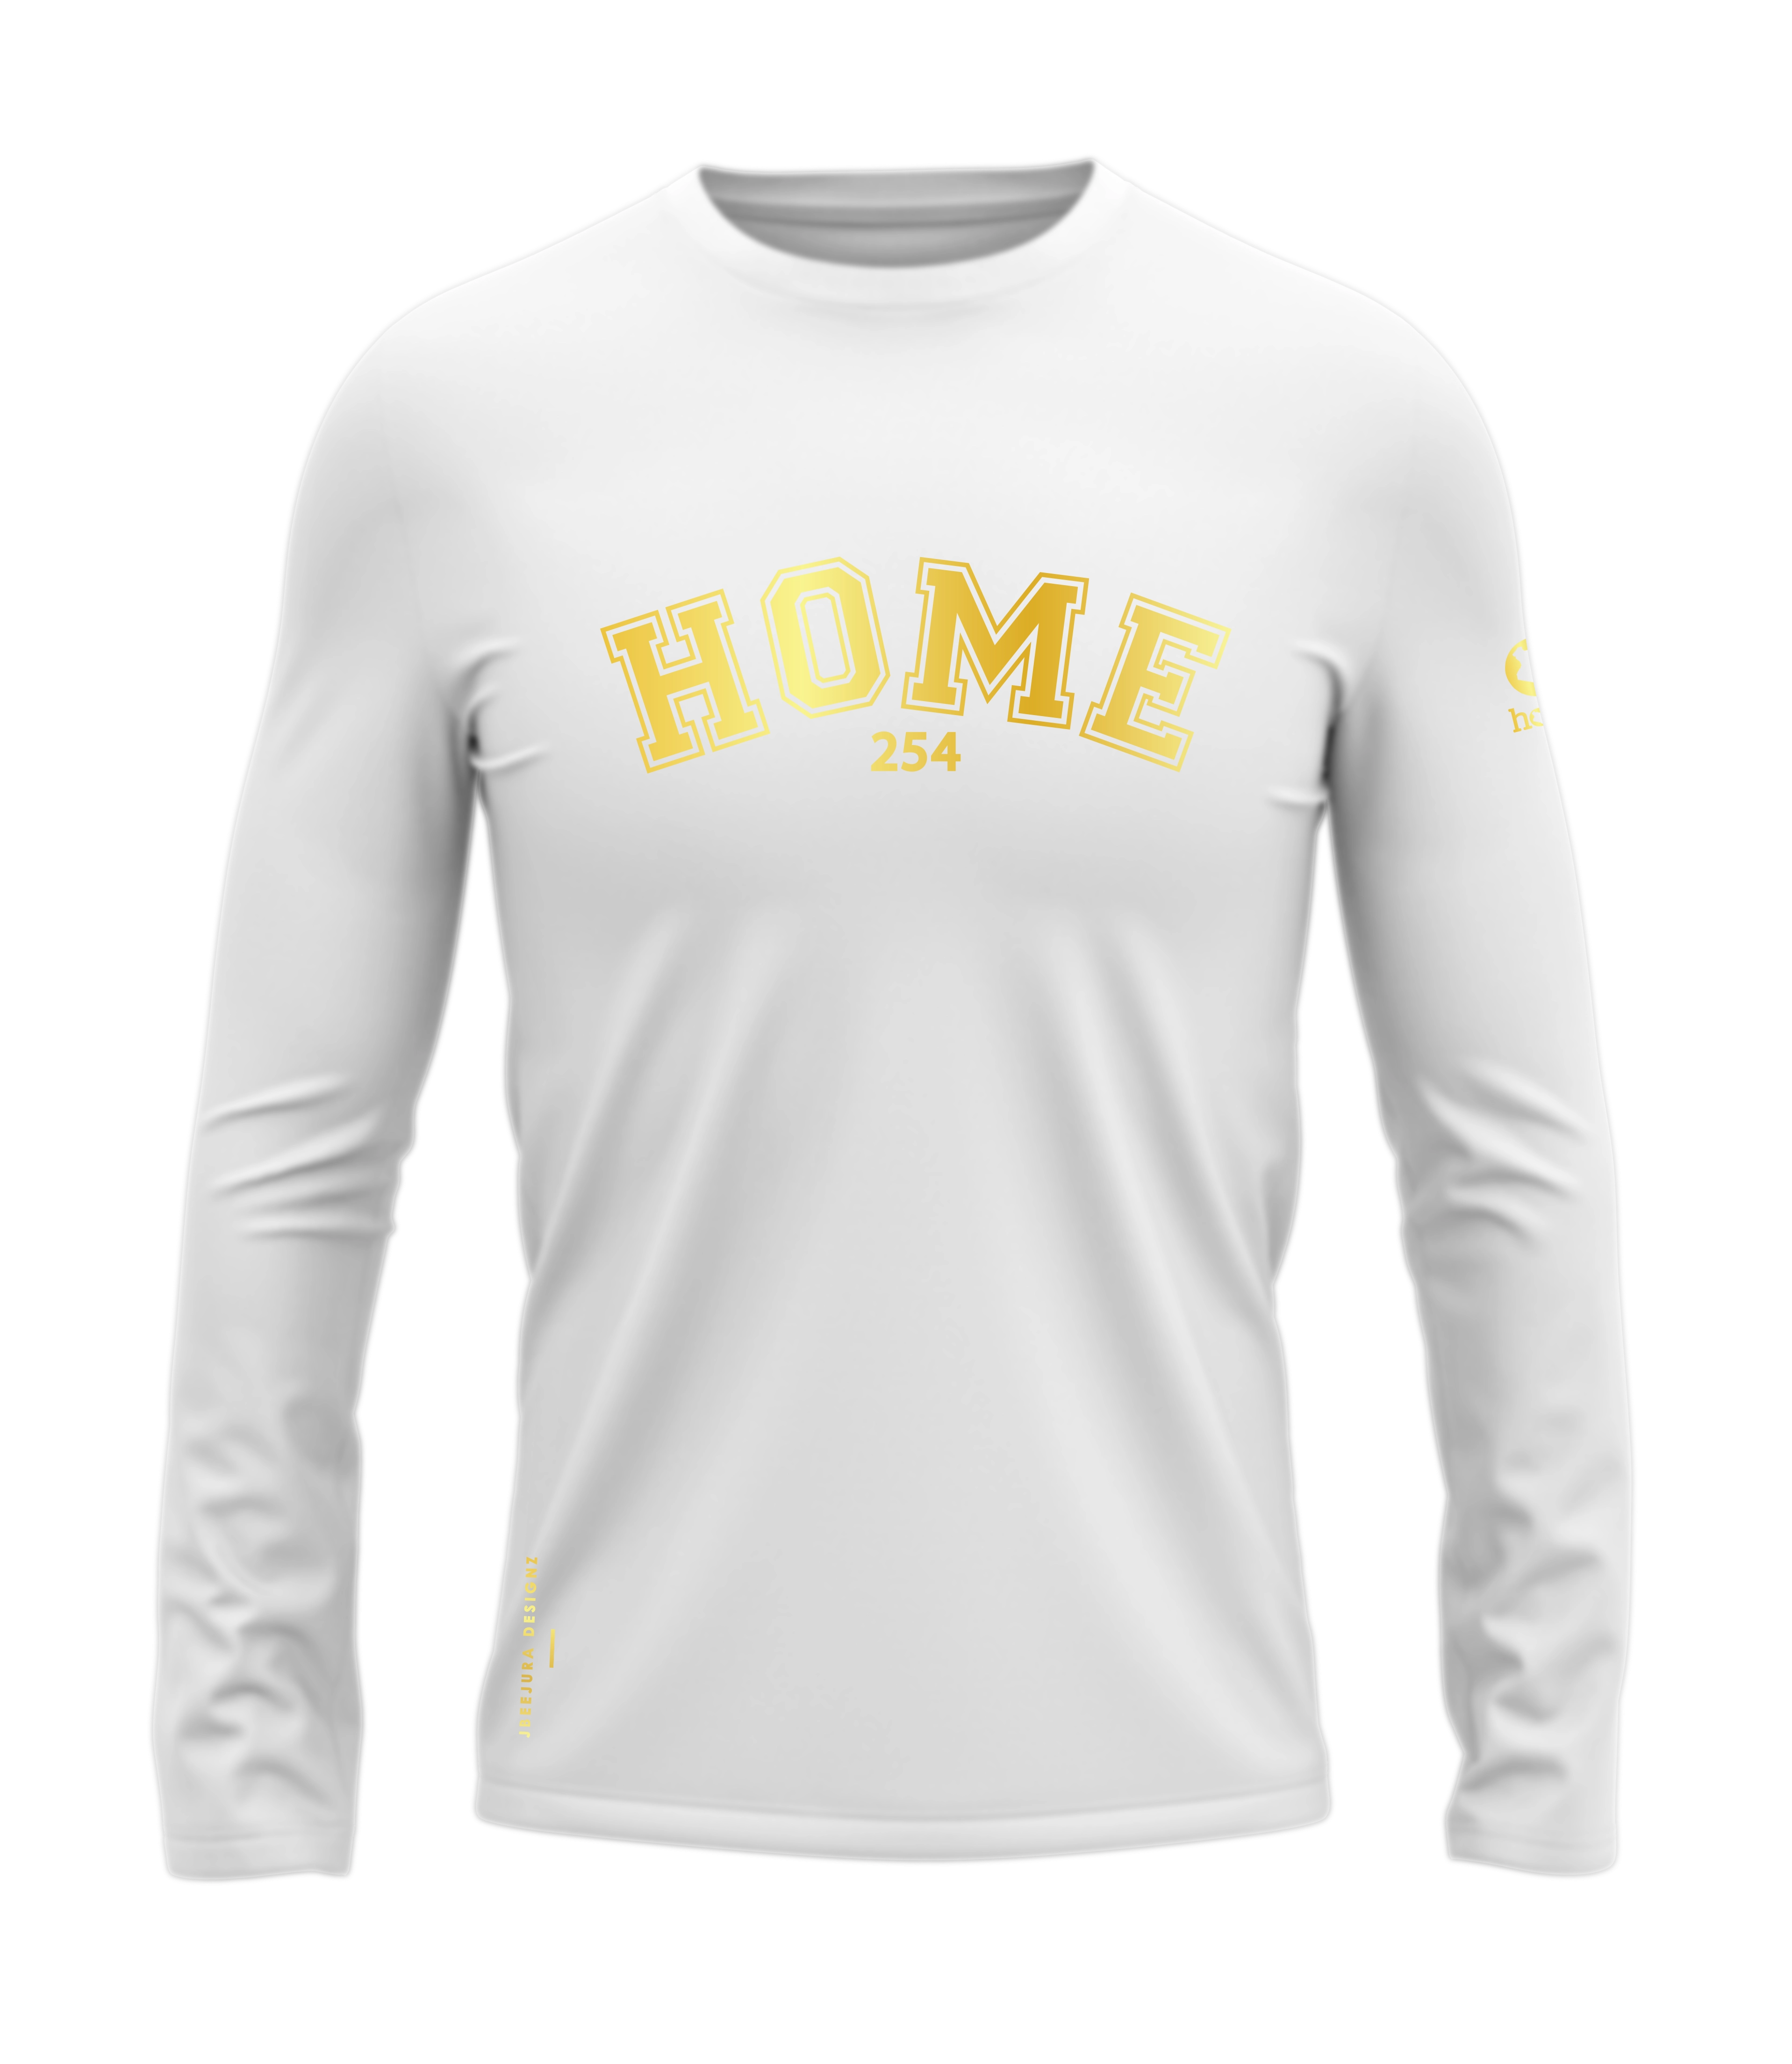 home_254 LONG-SLEEVED WHITE T-SHIRT WITH A GOLD COLLEGE PRINT – COTTON PLUS FABRIC